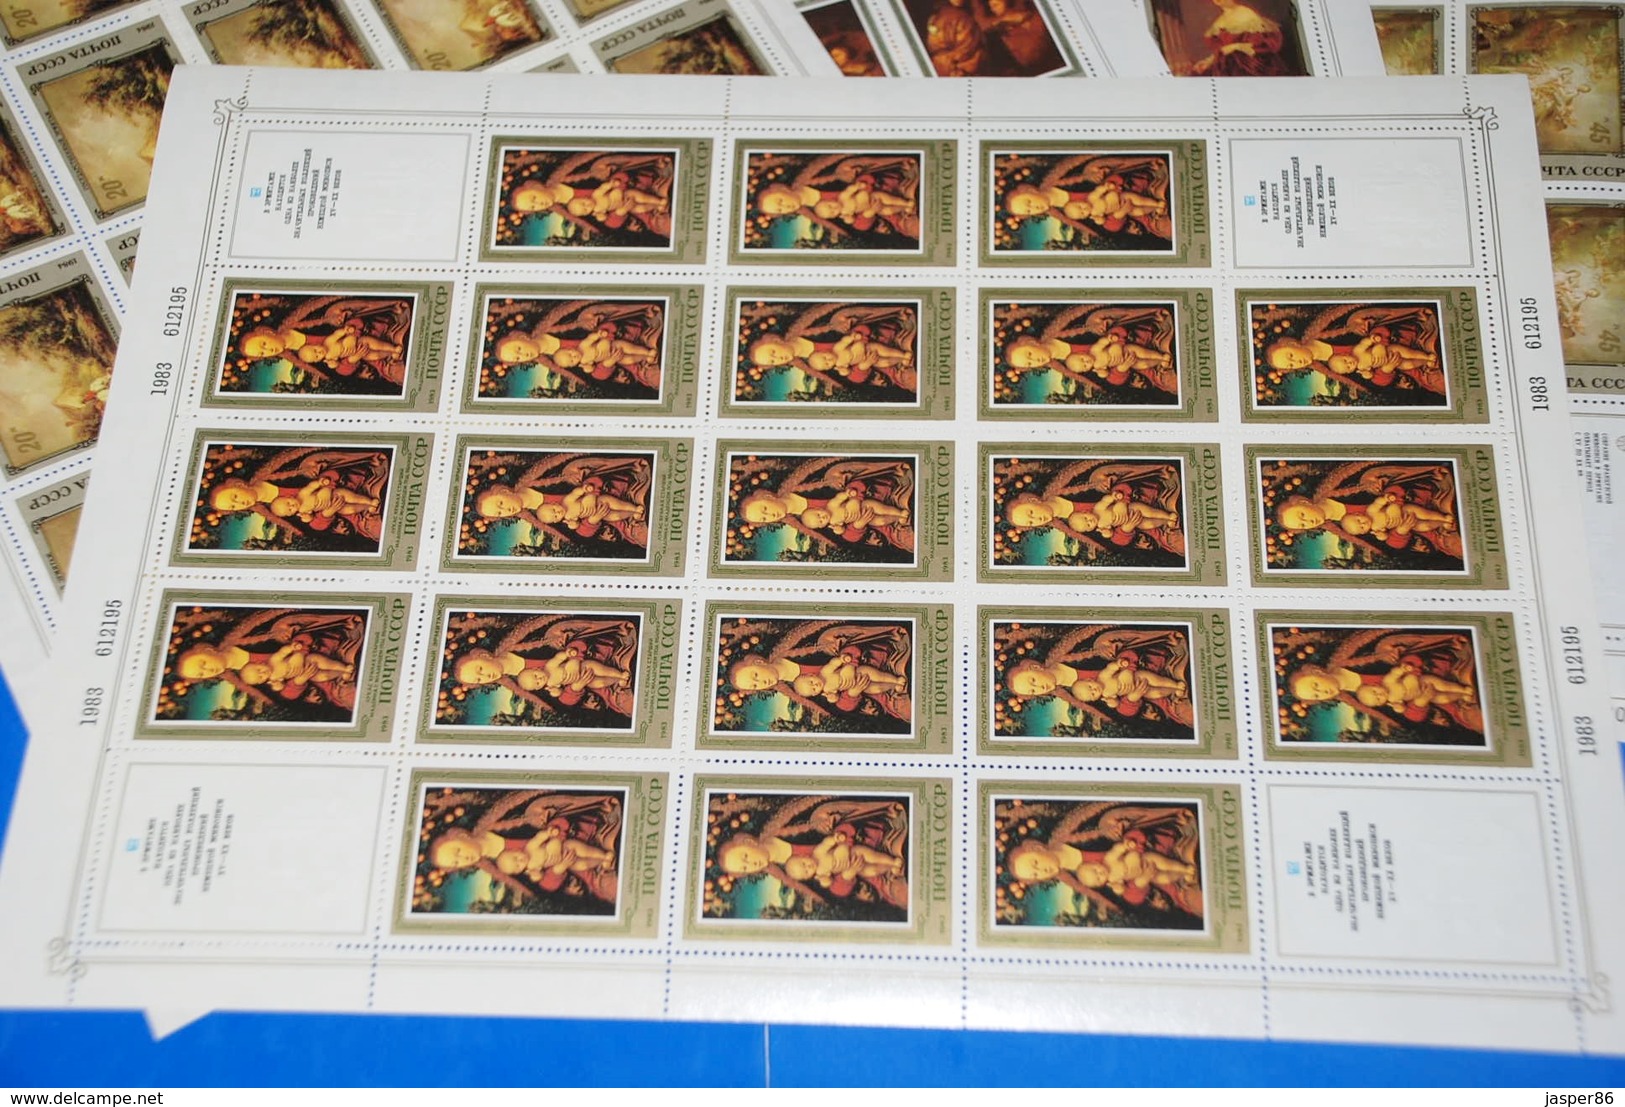 Hermitage Painting - Germany France England - 6 X MNH VF Full Sheets, Russia - Ganze Bögen